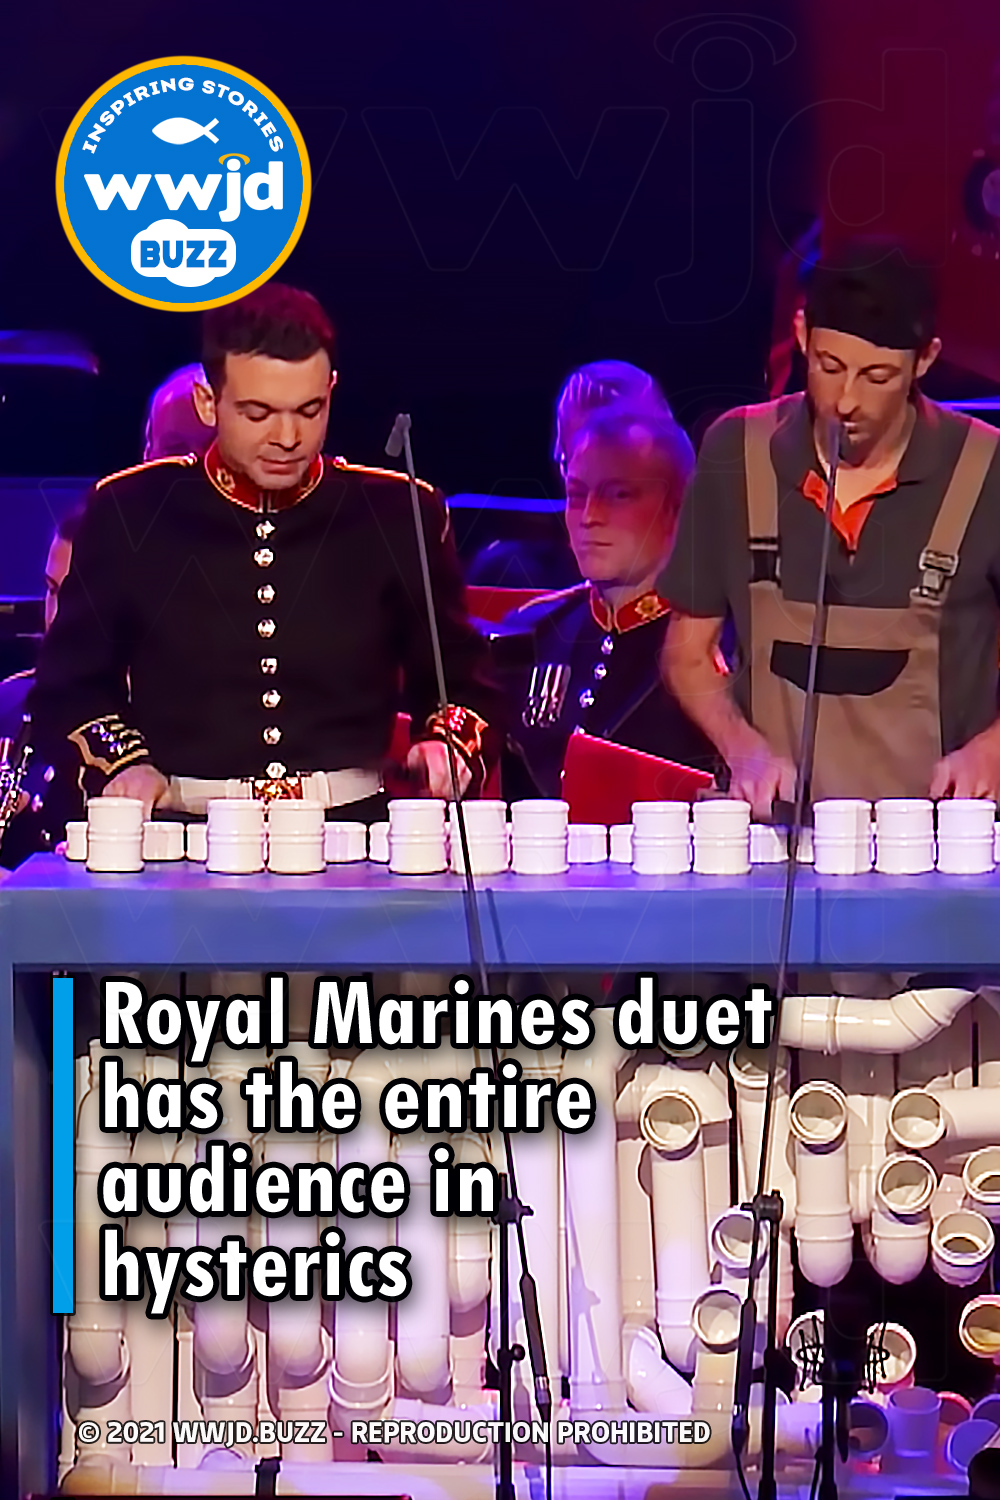 Royal Marines duet has the entire audience in hysterics